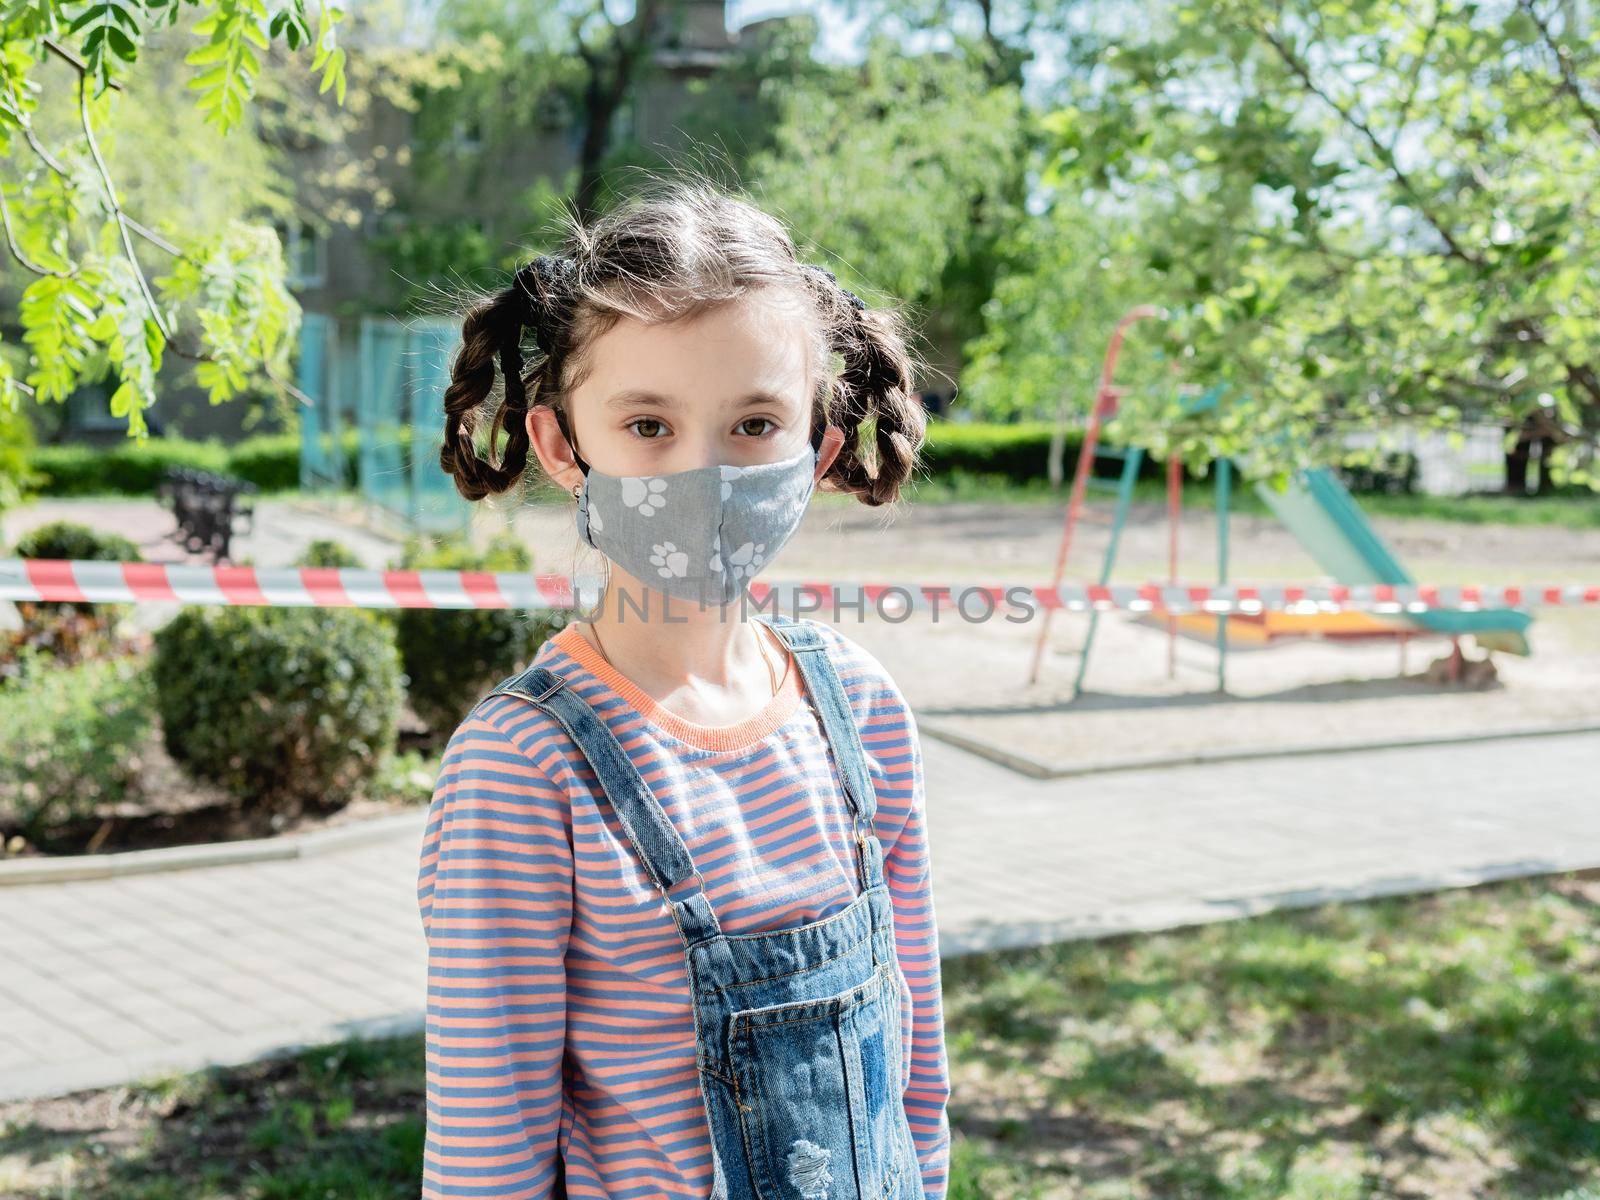 A little girl in a medical mask is not allowed to play in the playground during the coronavirus pandemic.